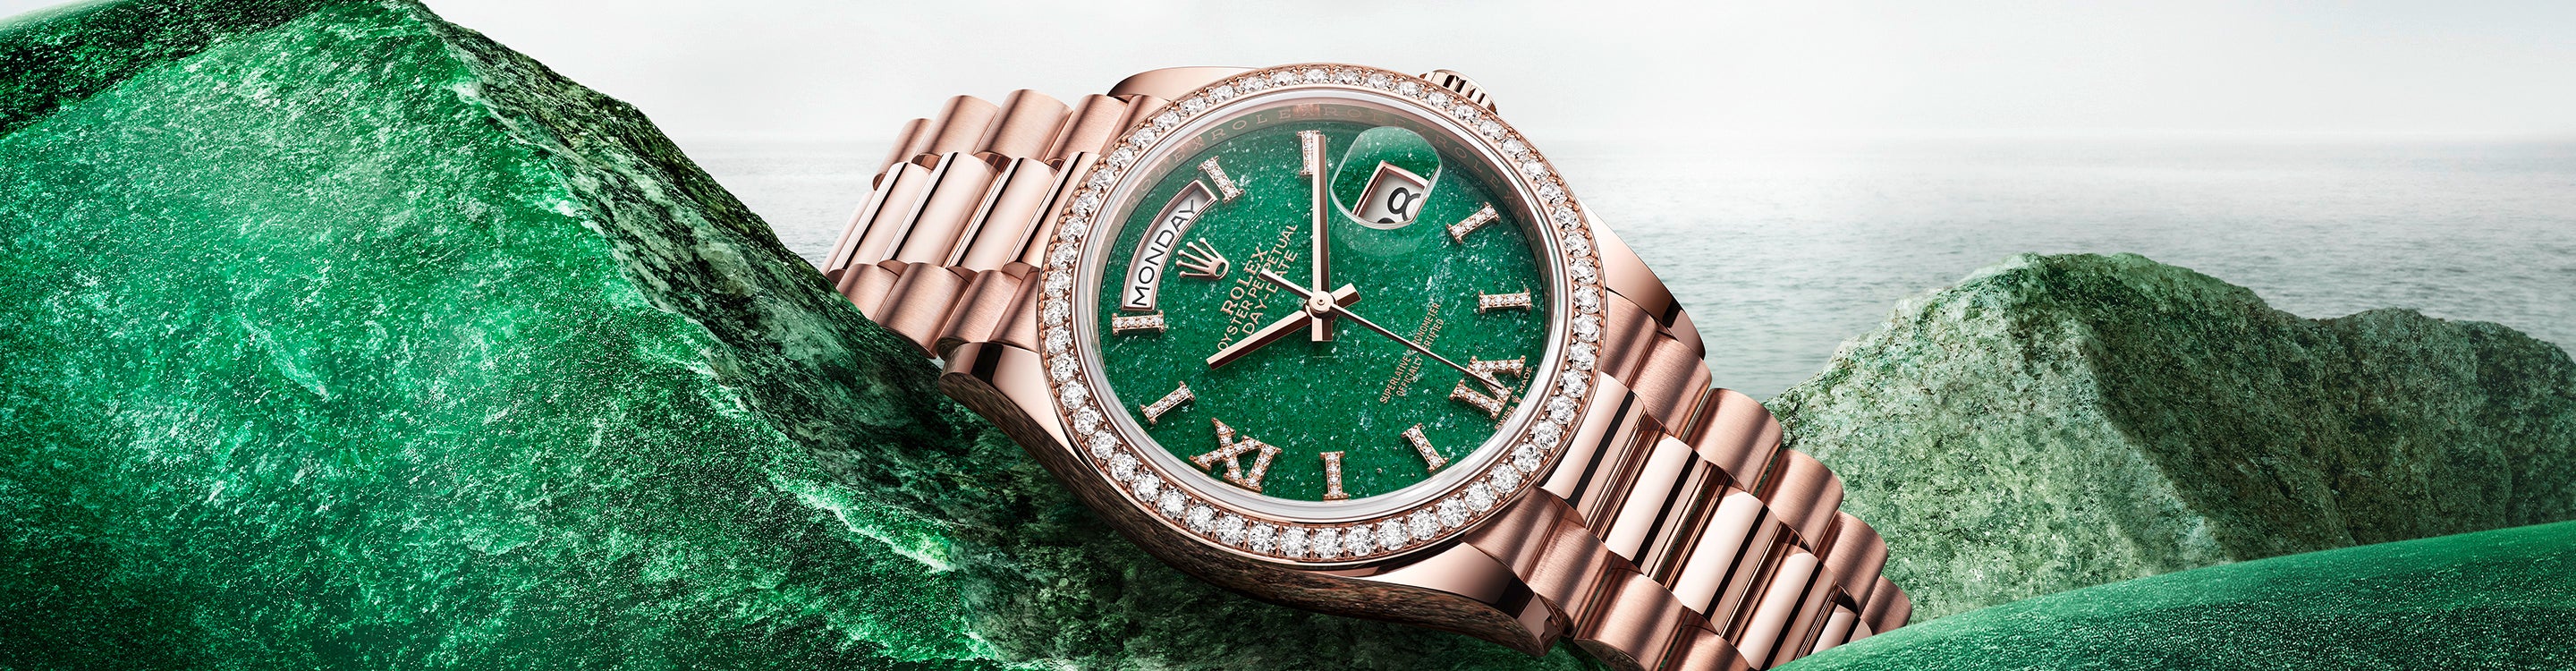 Rolex Day-Date on Emerald Rocks at Fink's Jewelers